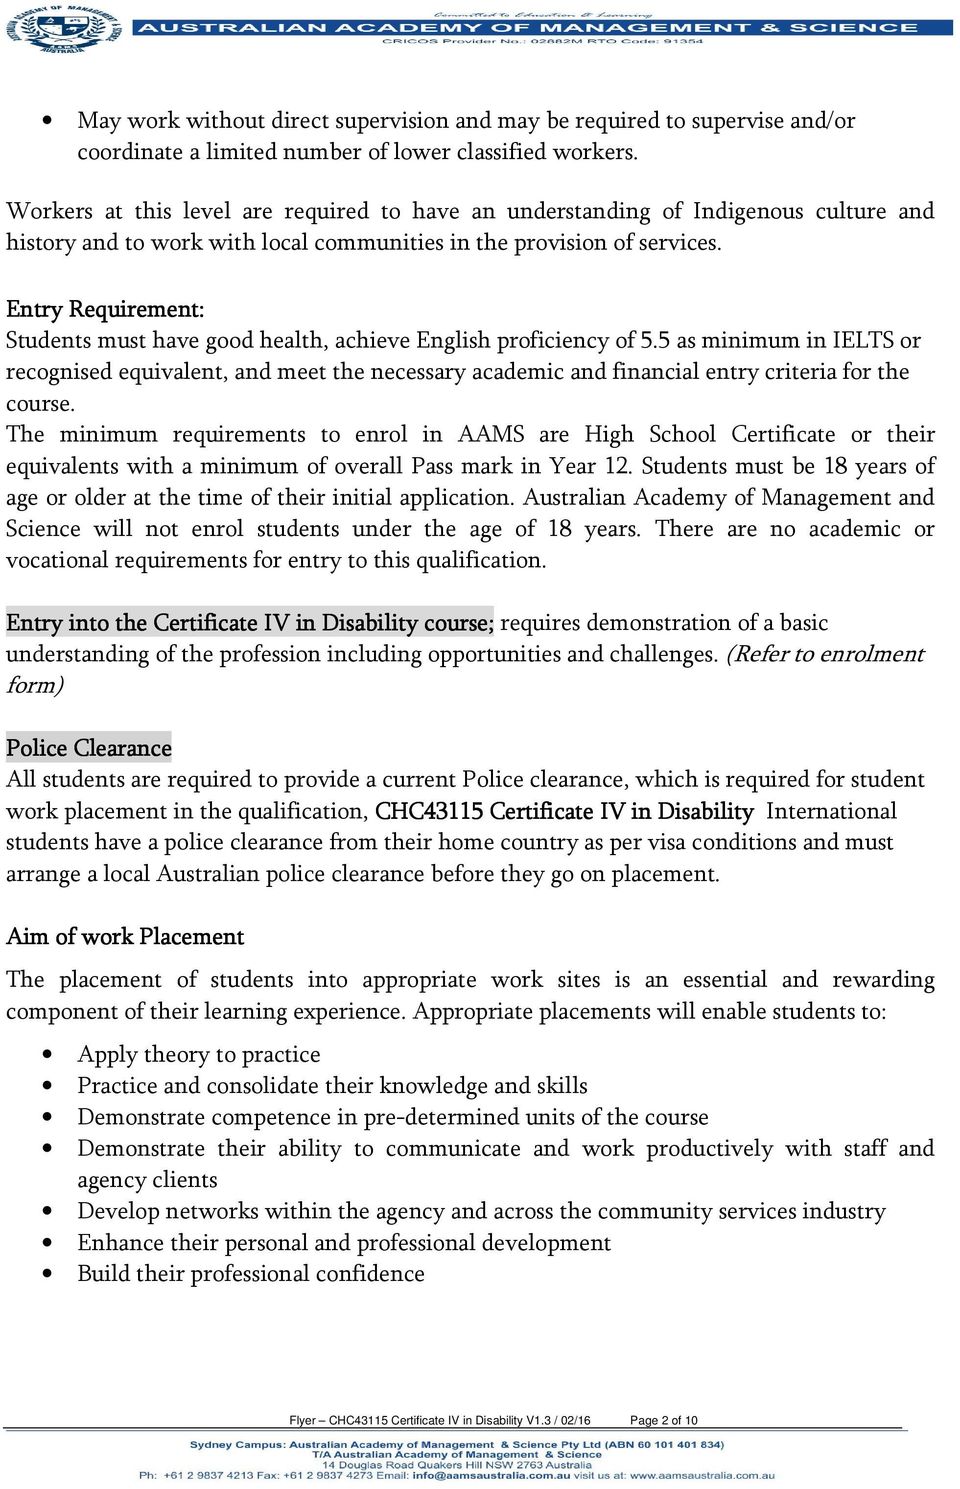 Entry Requirement: Students must have good health, achieve English proficiency of 5.